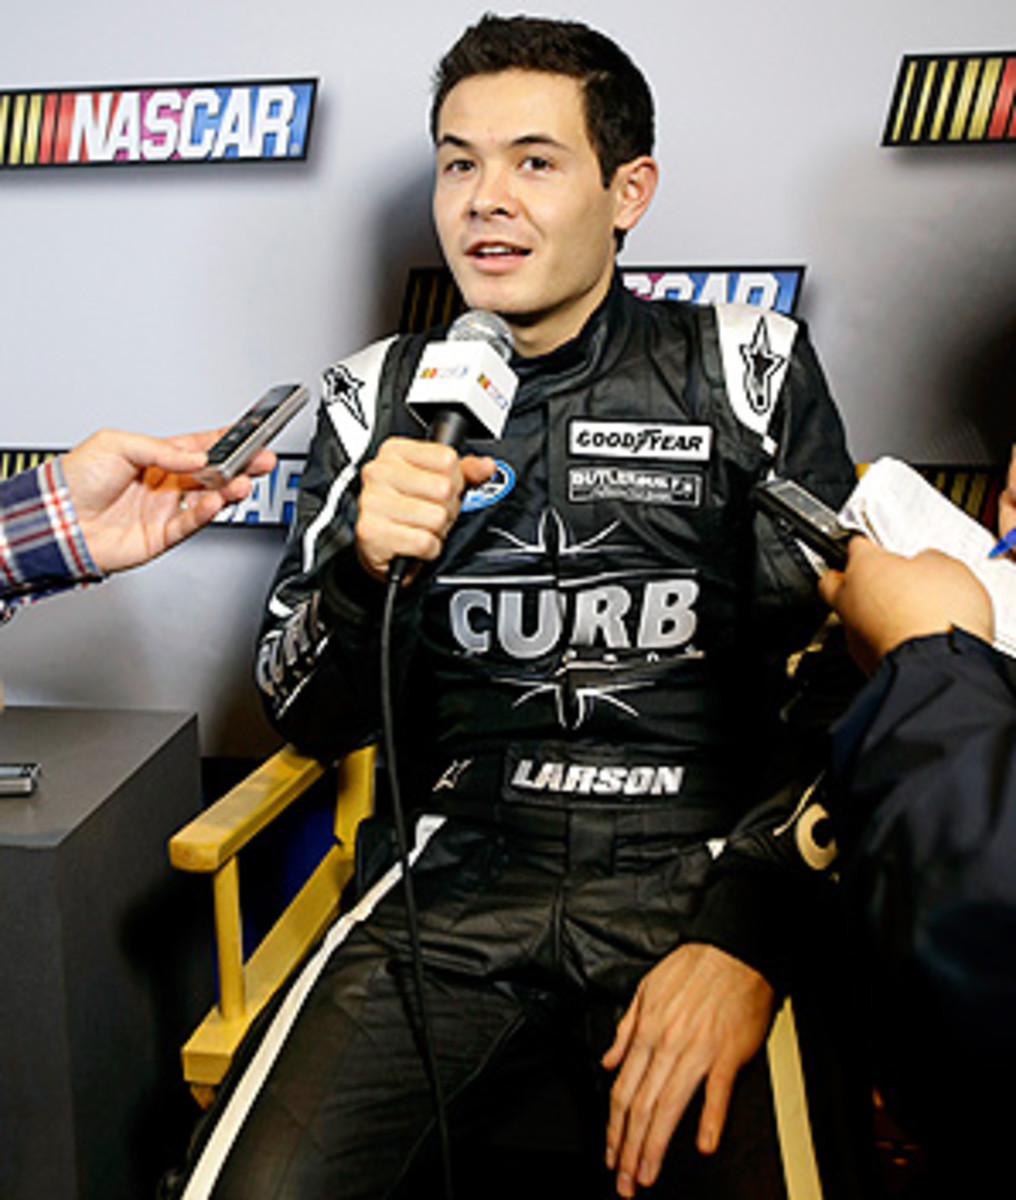 Kyle Larson's aggressive win at Battle of the Beach attracted attention of several Sprint Cup drivers.